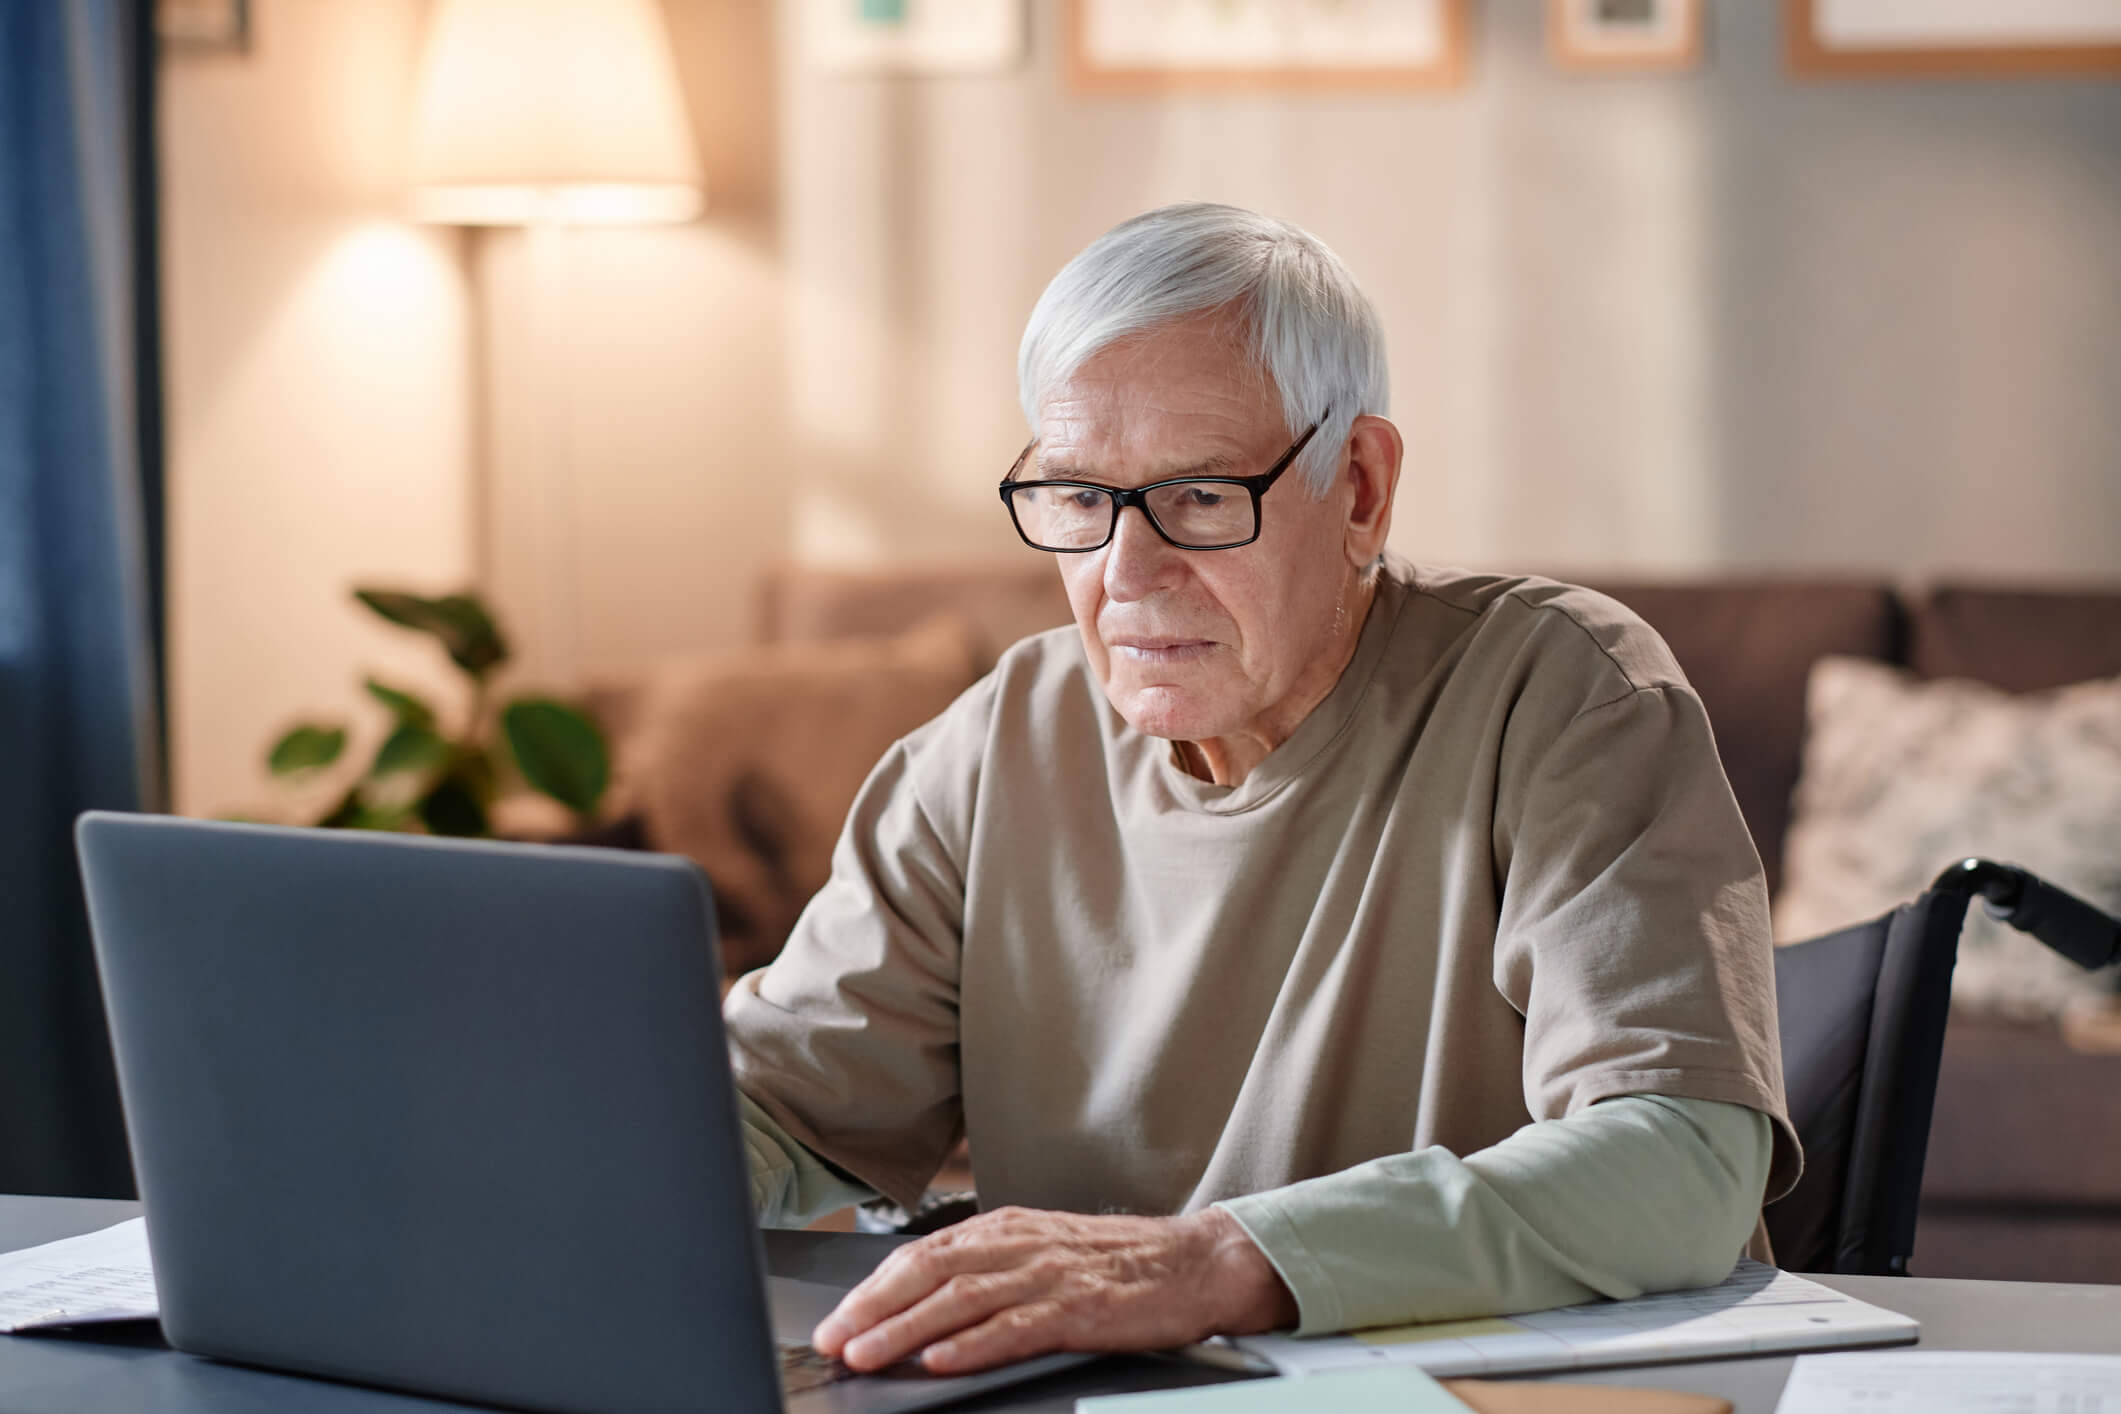 An older man in a wheelchair is at a table using a laptop and he has a pensive expression.